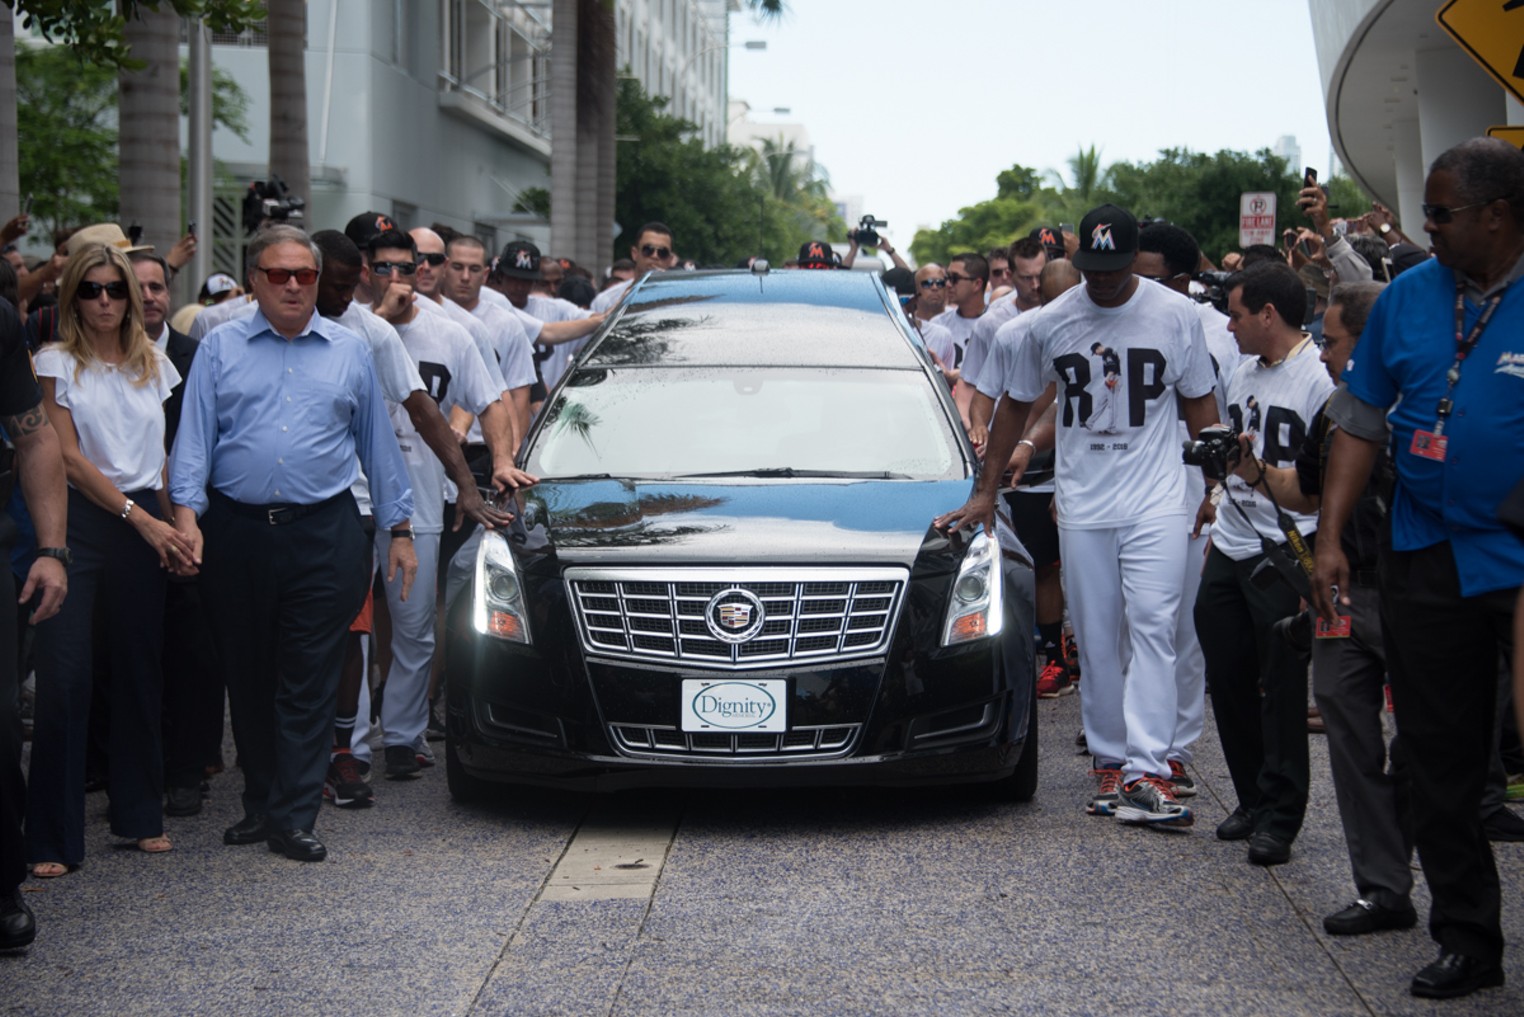 Miami mourns Jose Fernandez in citywide funeral procession